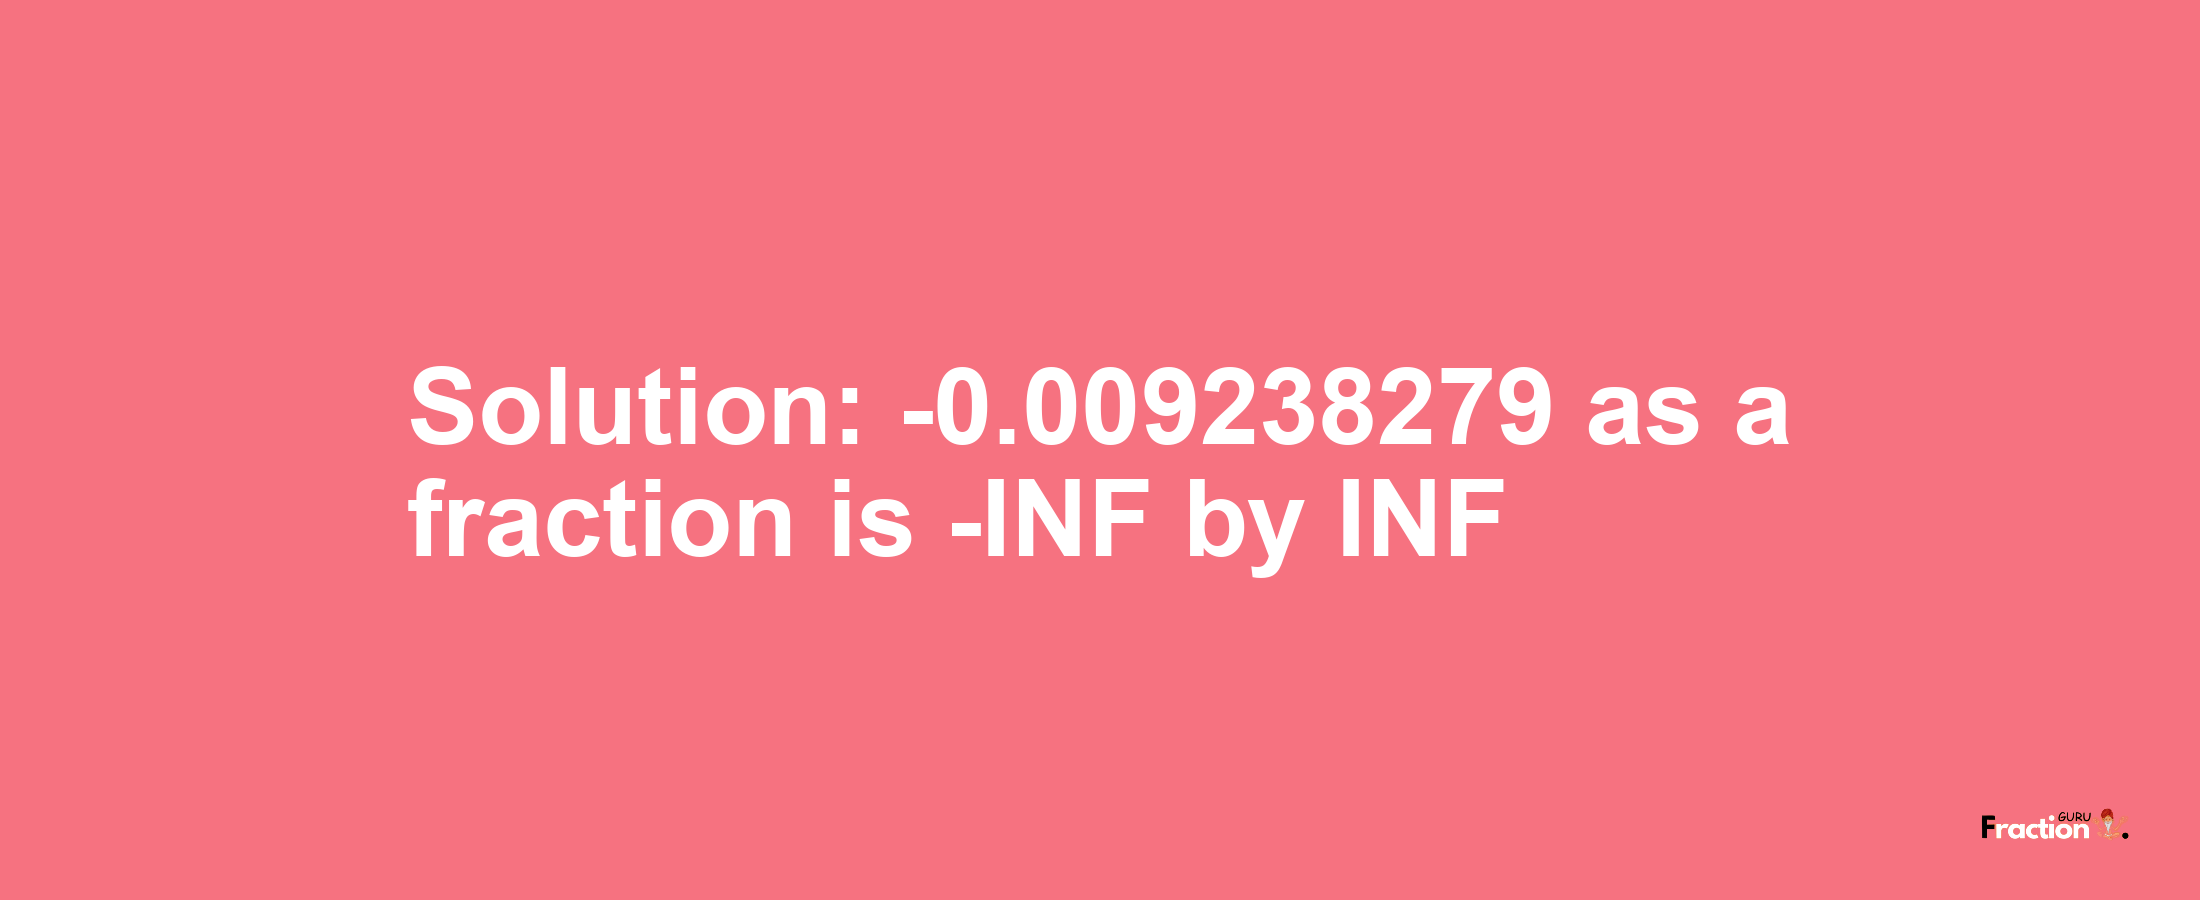 Solution:-0.009238279 as a fraction is -INF/INF